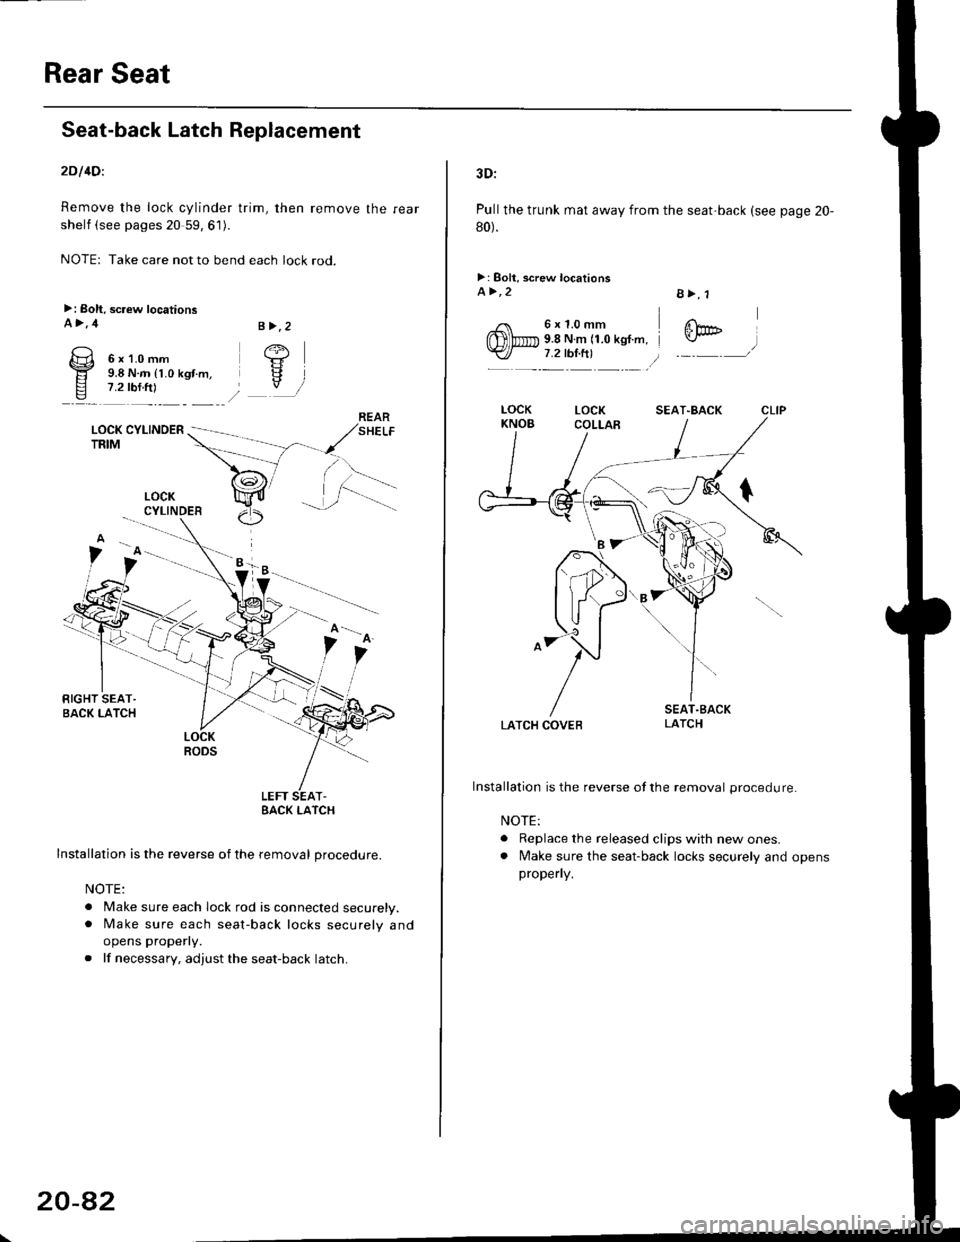 HONDA CIVIC 1999 6.G Workshop Manual Rear Seat
Seat-back Latch Replacement
2Dl4Dl
Remove the lock cylinder trim, then remove the rear
shelf (see pages 20 59, 61).
NOTE: Take care not to bend each lock rod.
>: Boh, screw locationsA>,4
6x1